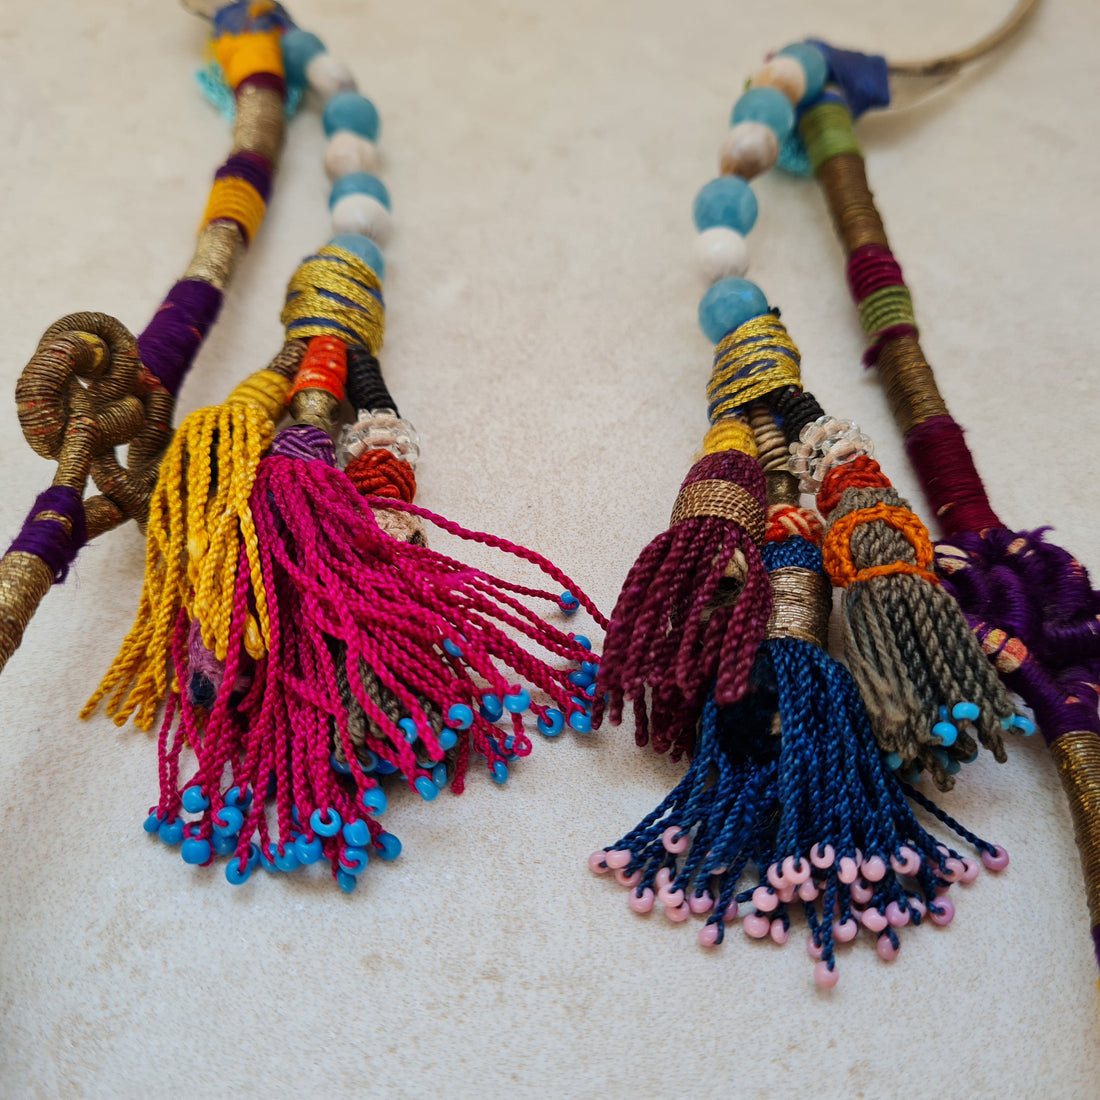 New Year, New Workshops: Textile Jewellery